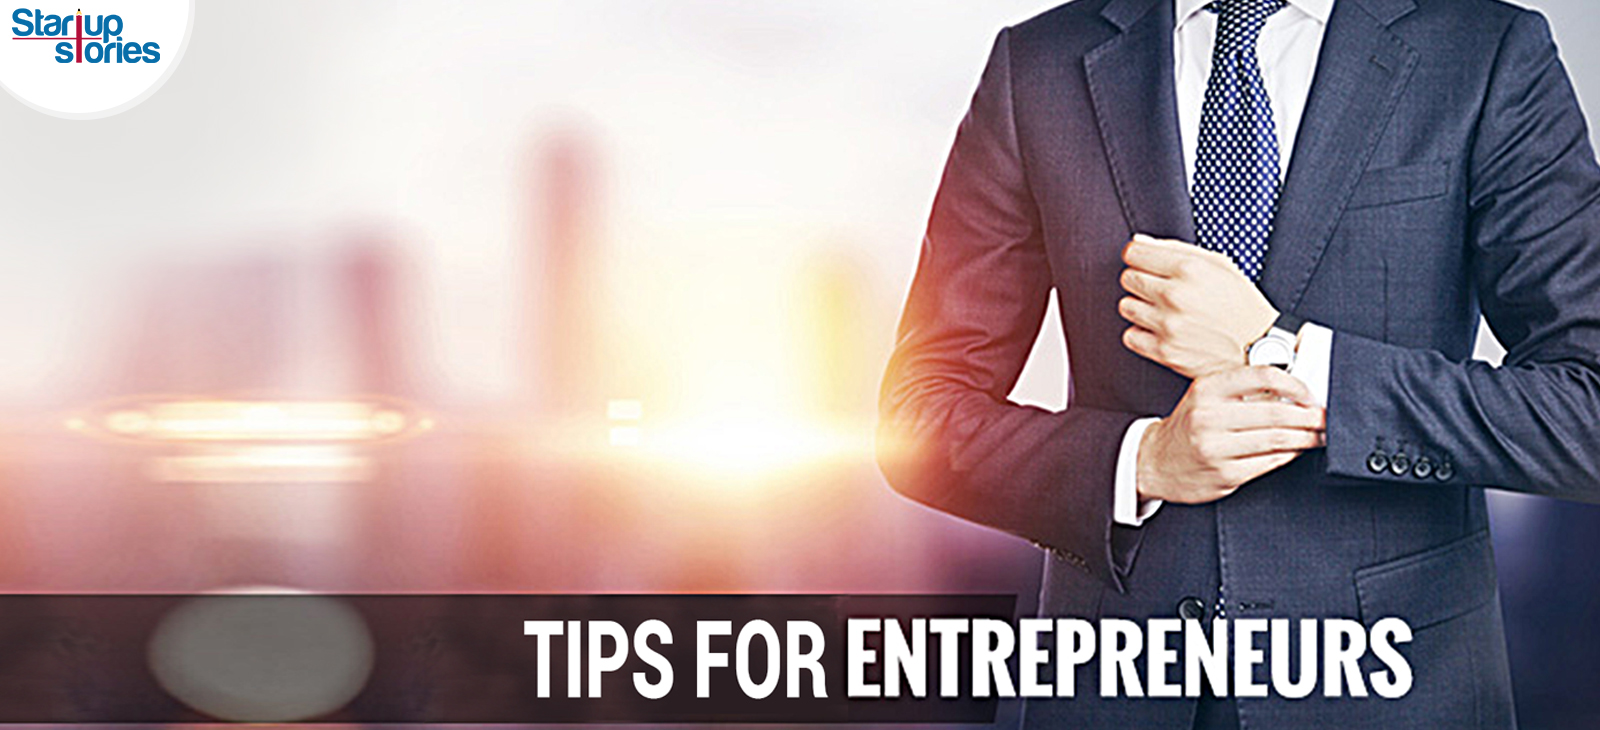 Tips For Creative Entrepreneurs,Startup News India, startup stories,Featured,few interesting Tips for Creative Entrepreneurs,Creative Entrepreneurs stories,tips and tricks to become Creative Entrepreneur,Powerful Ways to become Creative Entrepreneur